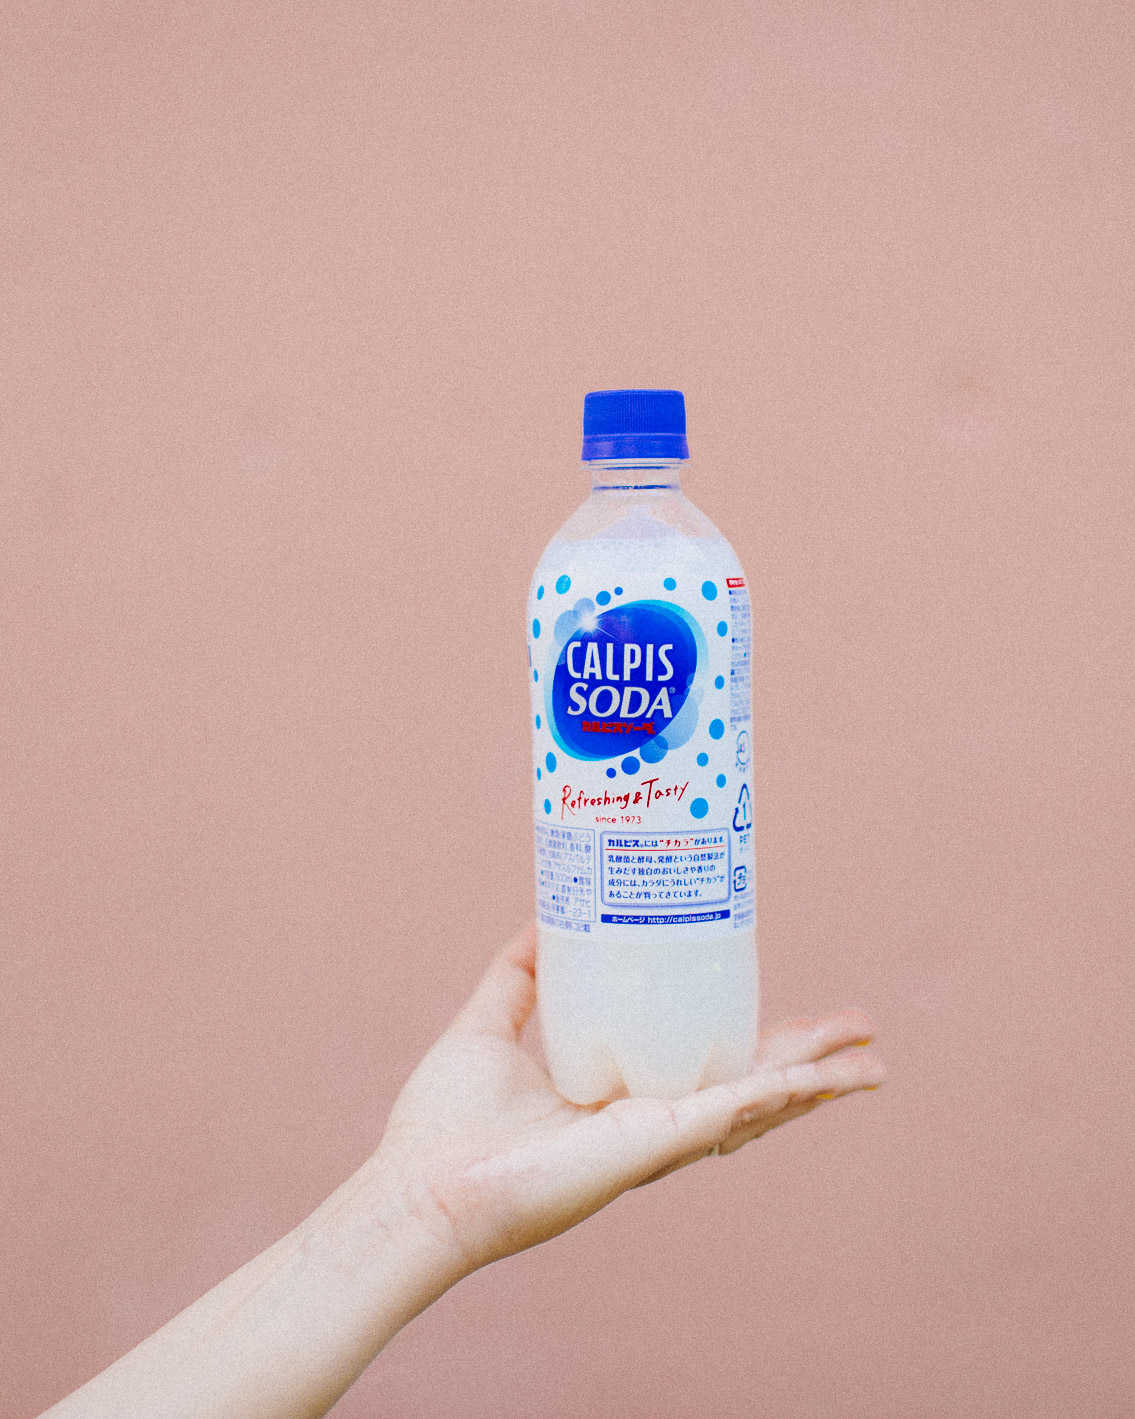 Calpis soda - The cat, you and us